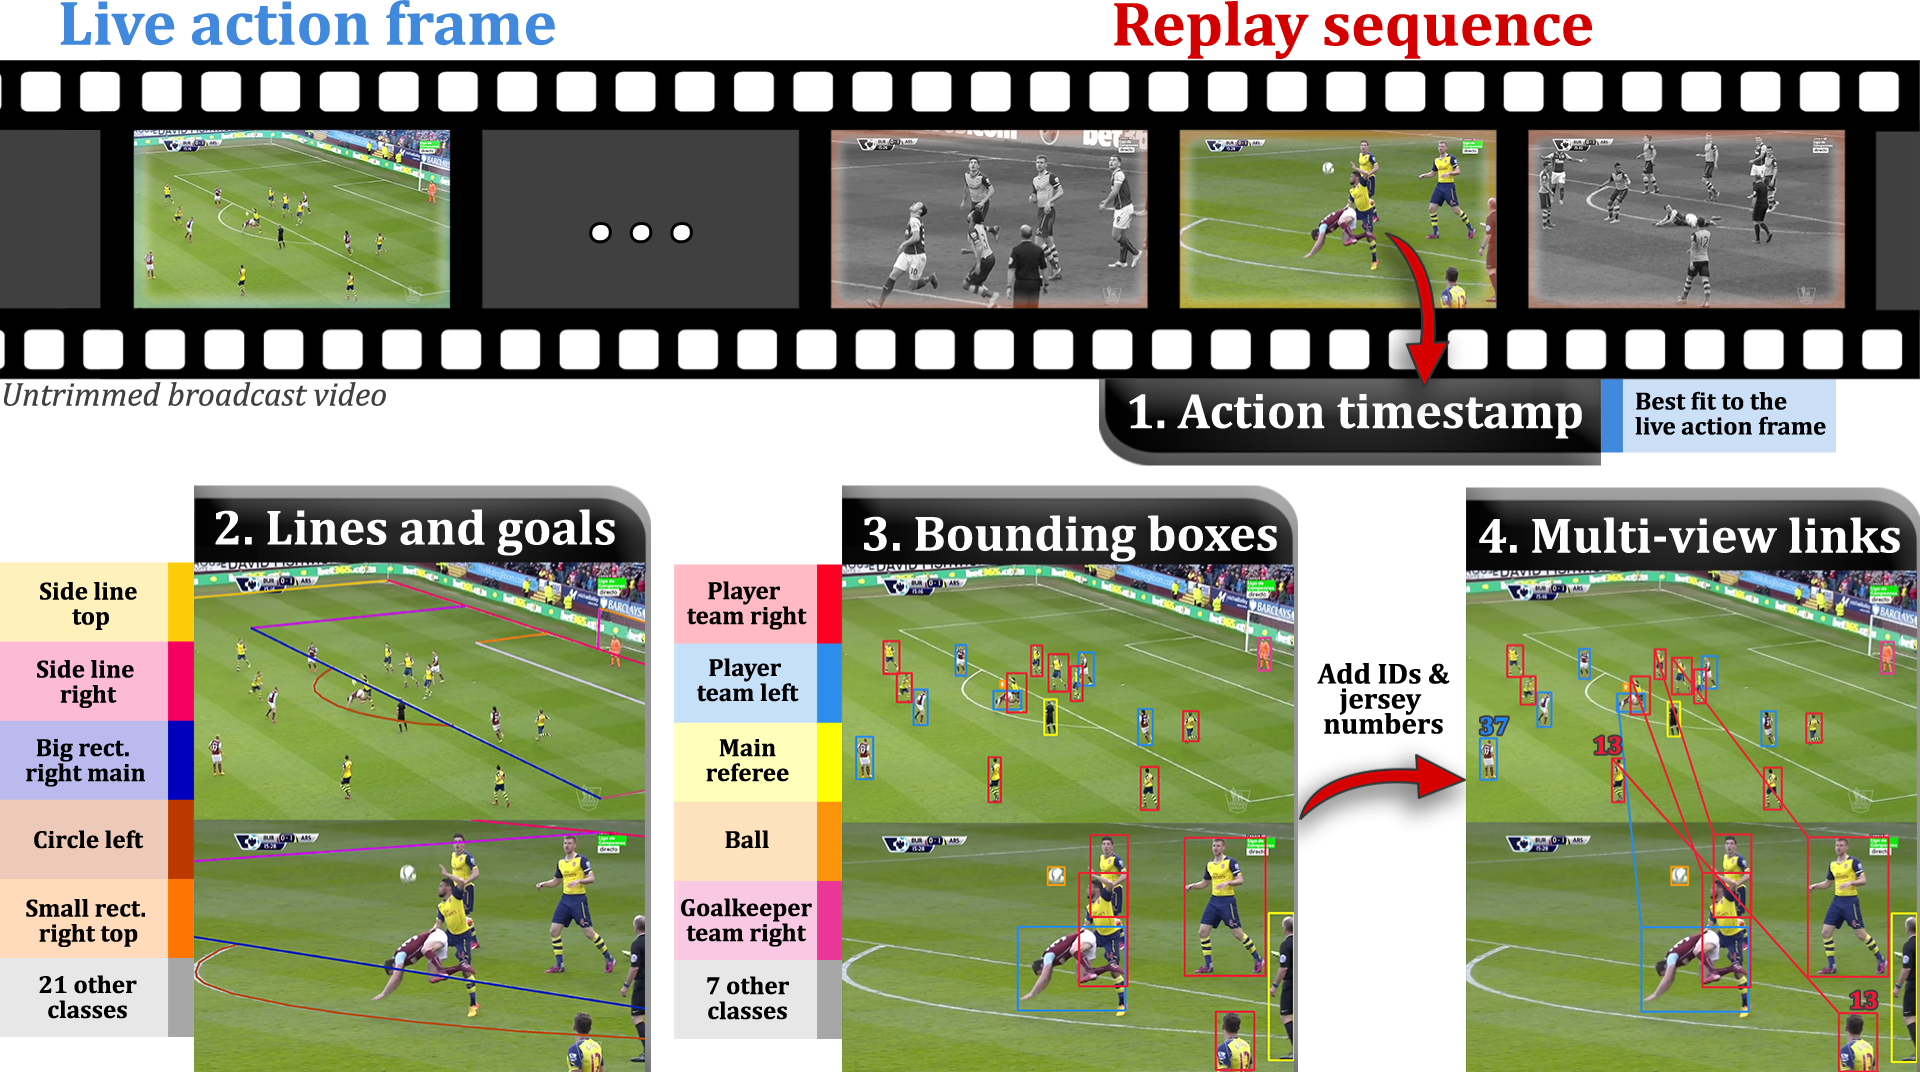 Goal Party - Soccer Freekick - Apps on Google Play